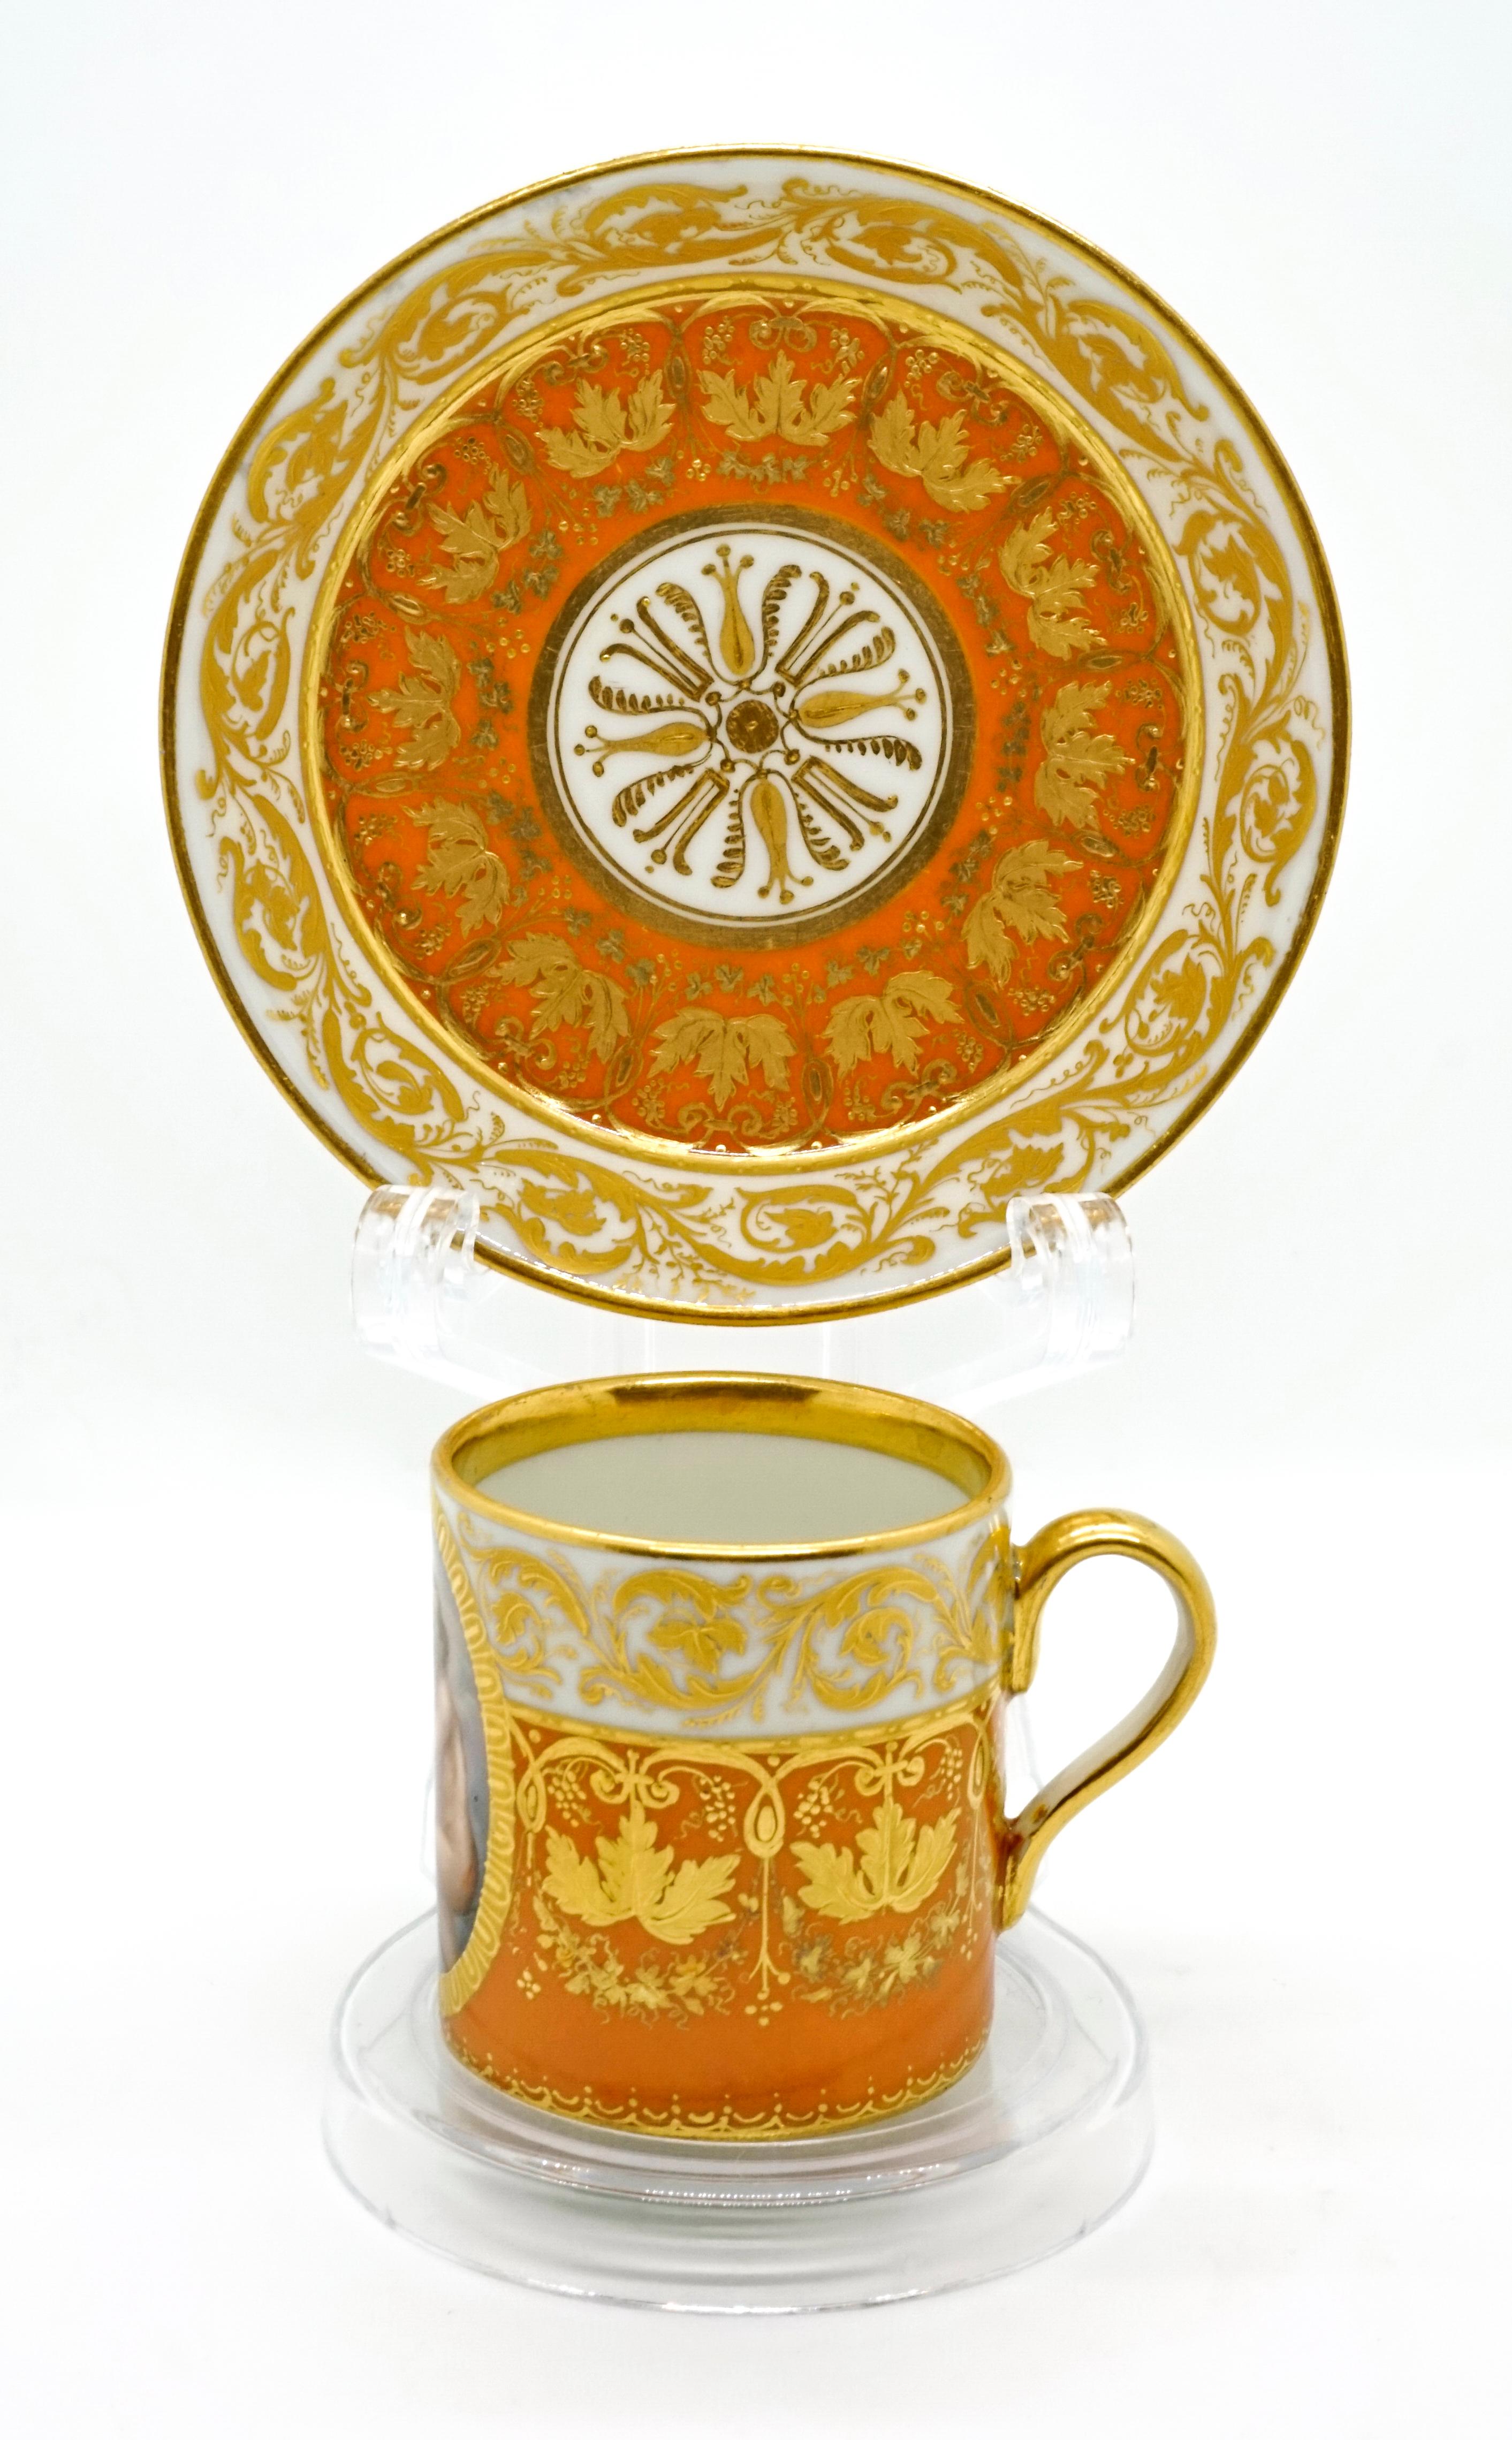 The cylindrical white cup is painted two-thirds dark yellow from the bottom upwards, and over the entire cup there is ample gold decoration with vine leaves and tendrils, gold also on the top edge and the upper inner rim. Opposite the curved handle